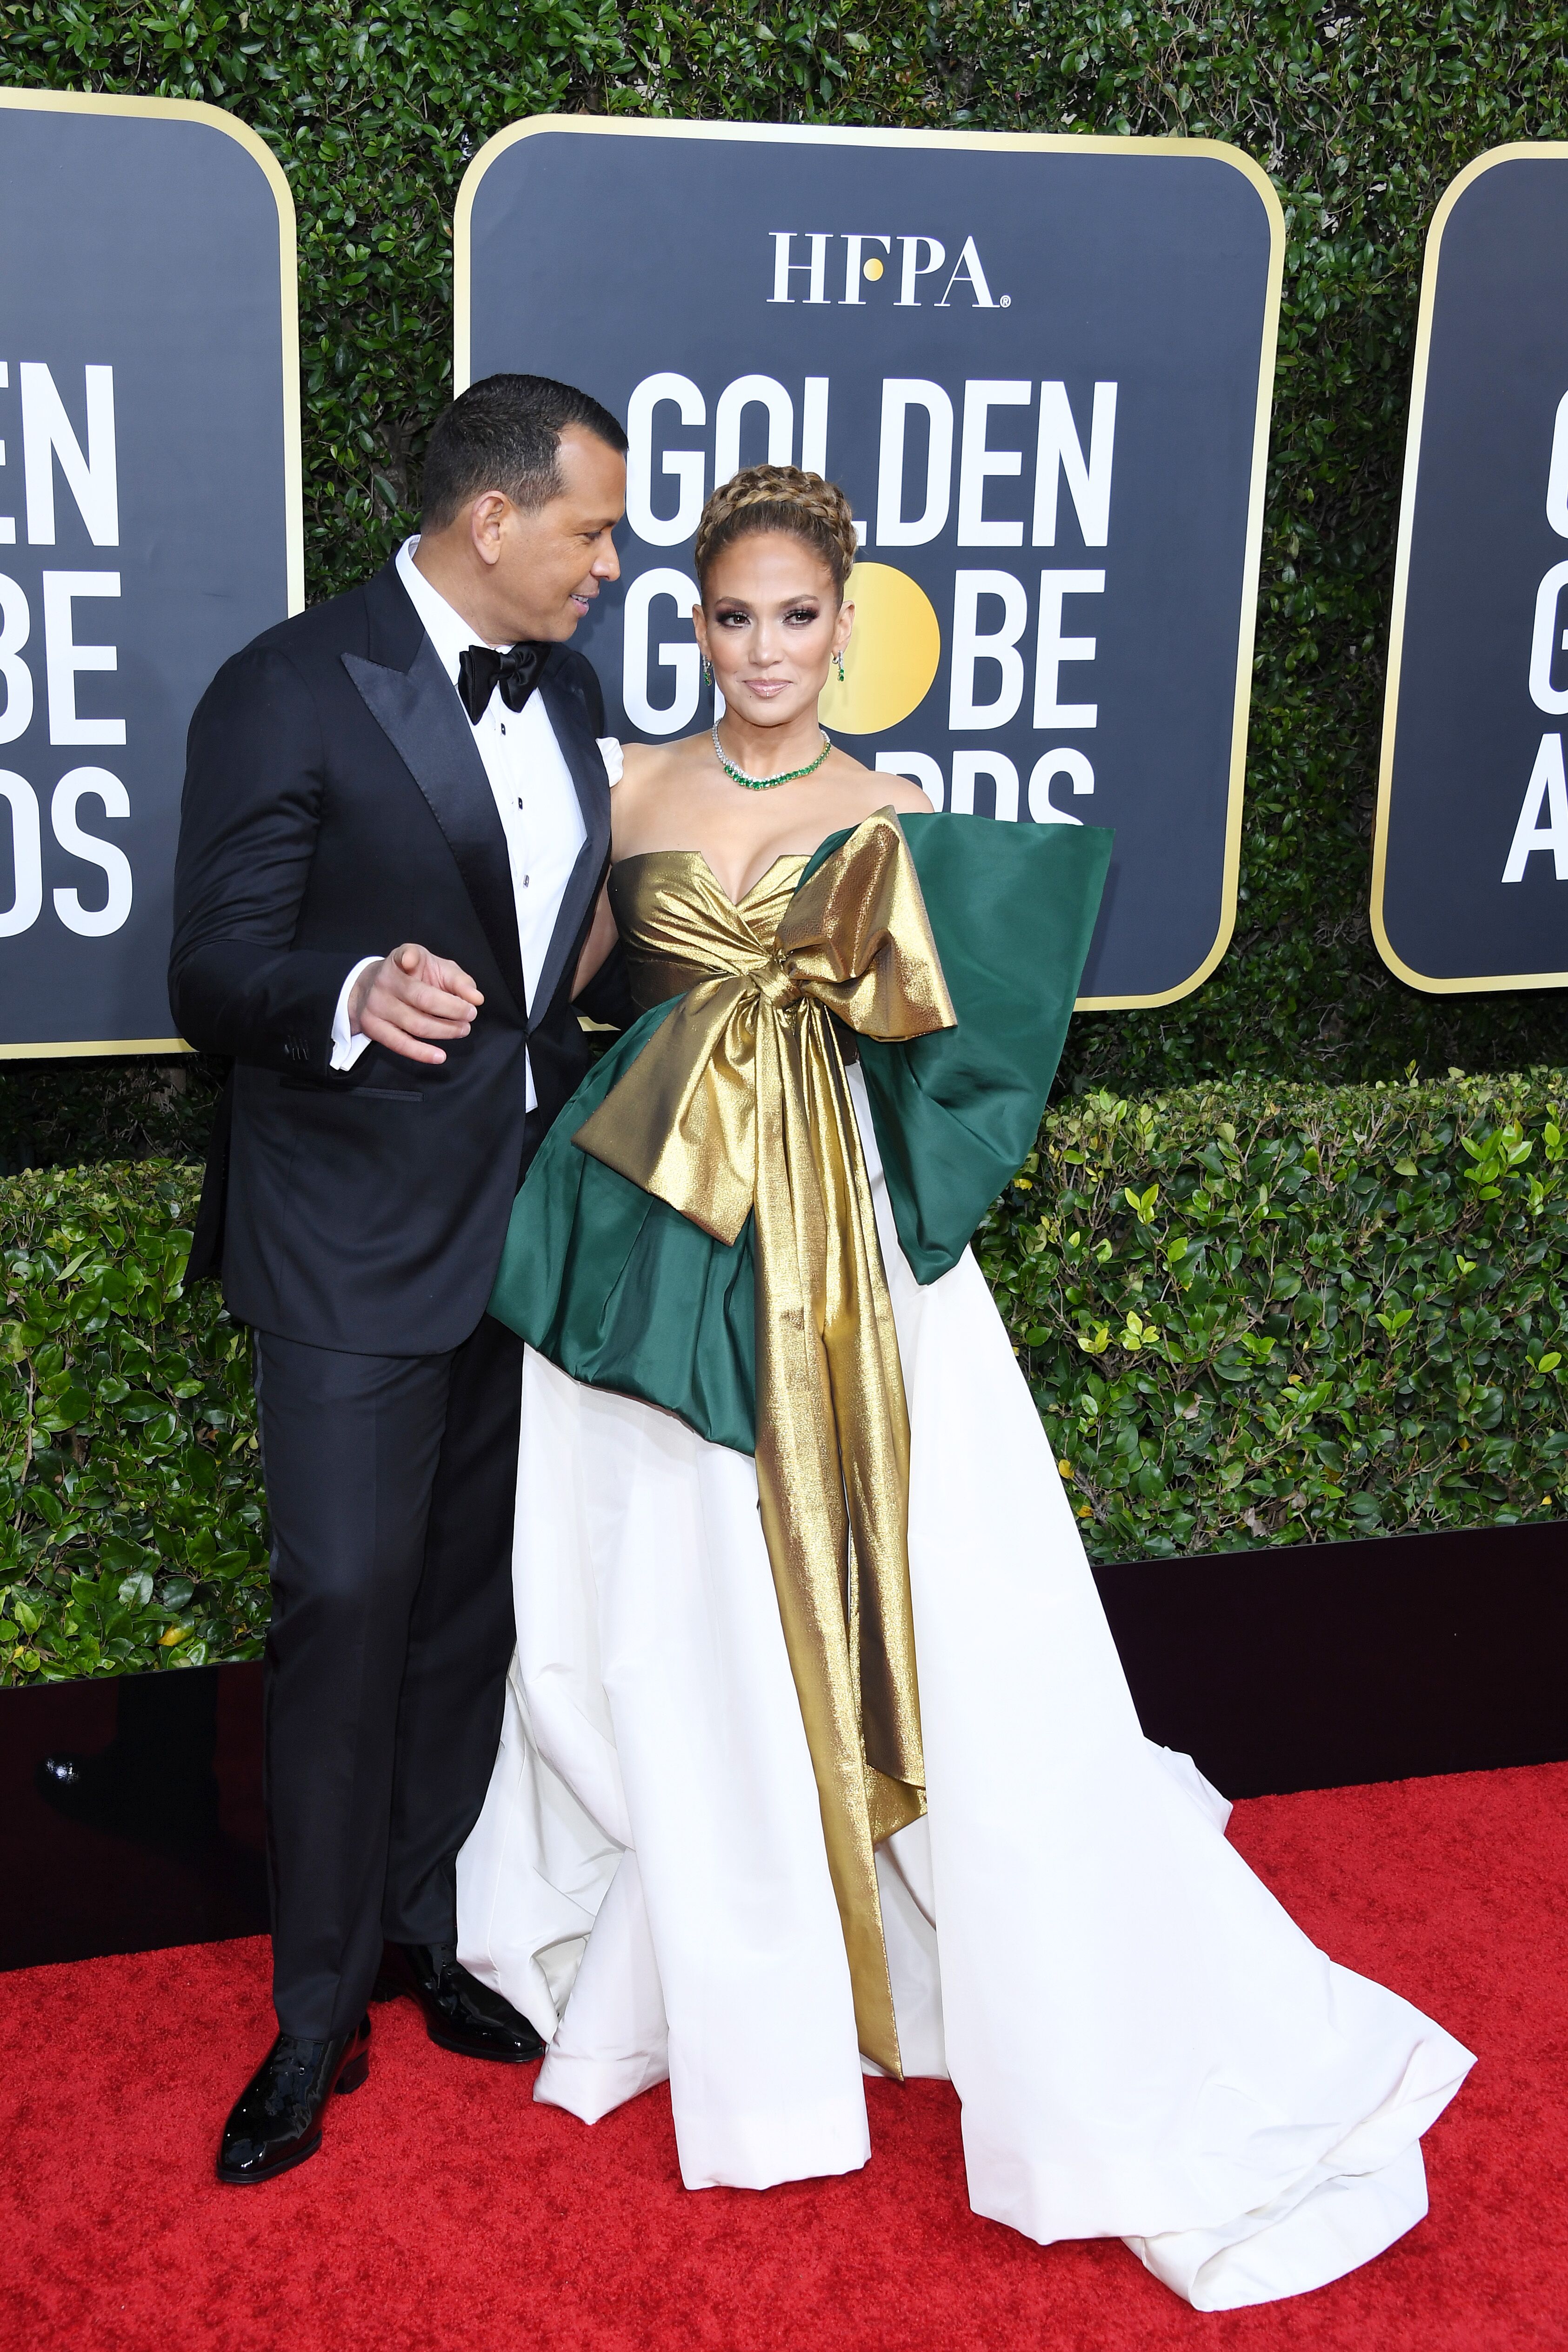 Alex Rodriguez and Jennifer Lopez at the 77th Annual Golden Globe Awards on January 05, 2020. | Photo: Getty Images